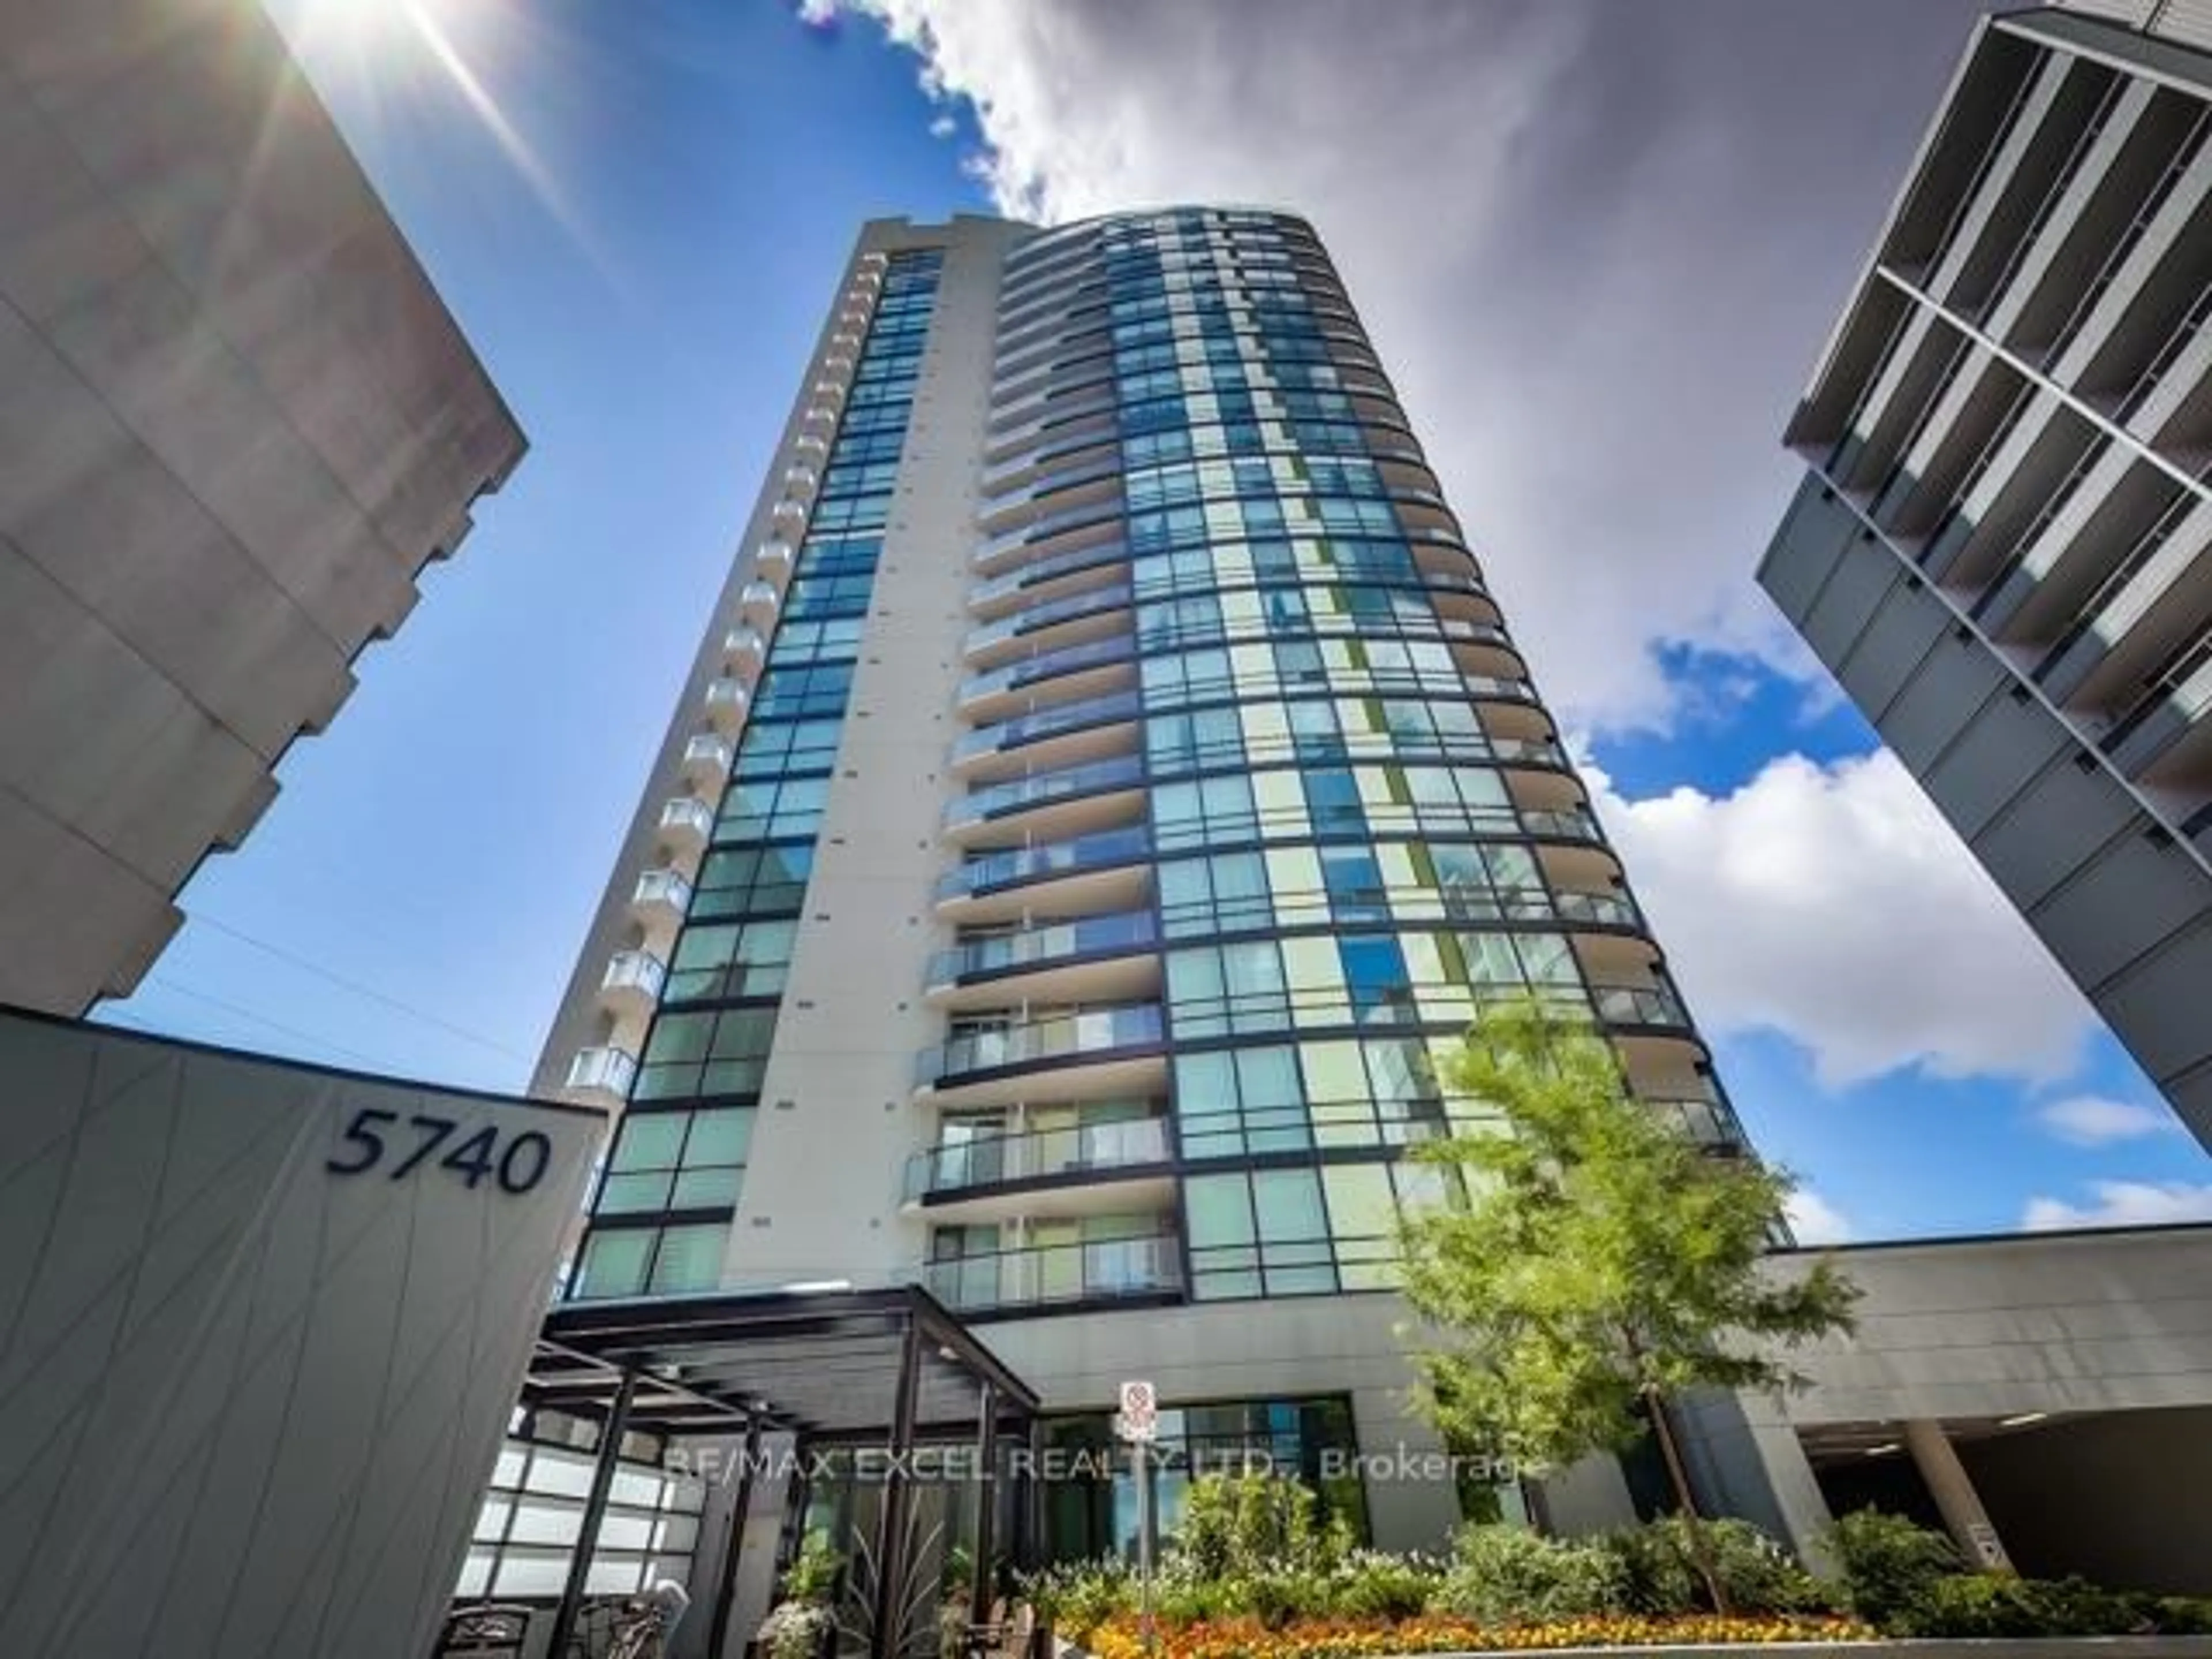 A pic from exterior of the house or condo for 5740 Yonge St #803, Toronto Ontario M2M 0B1